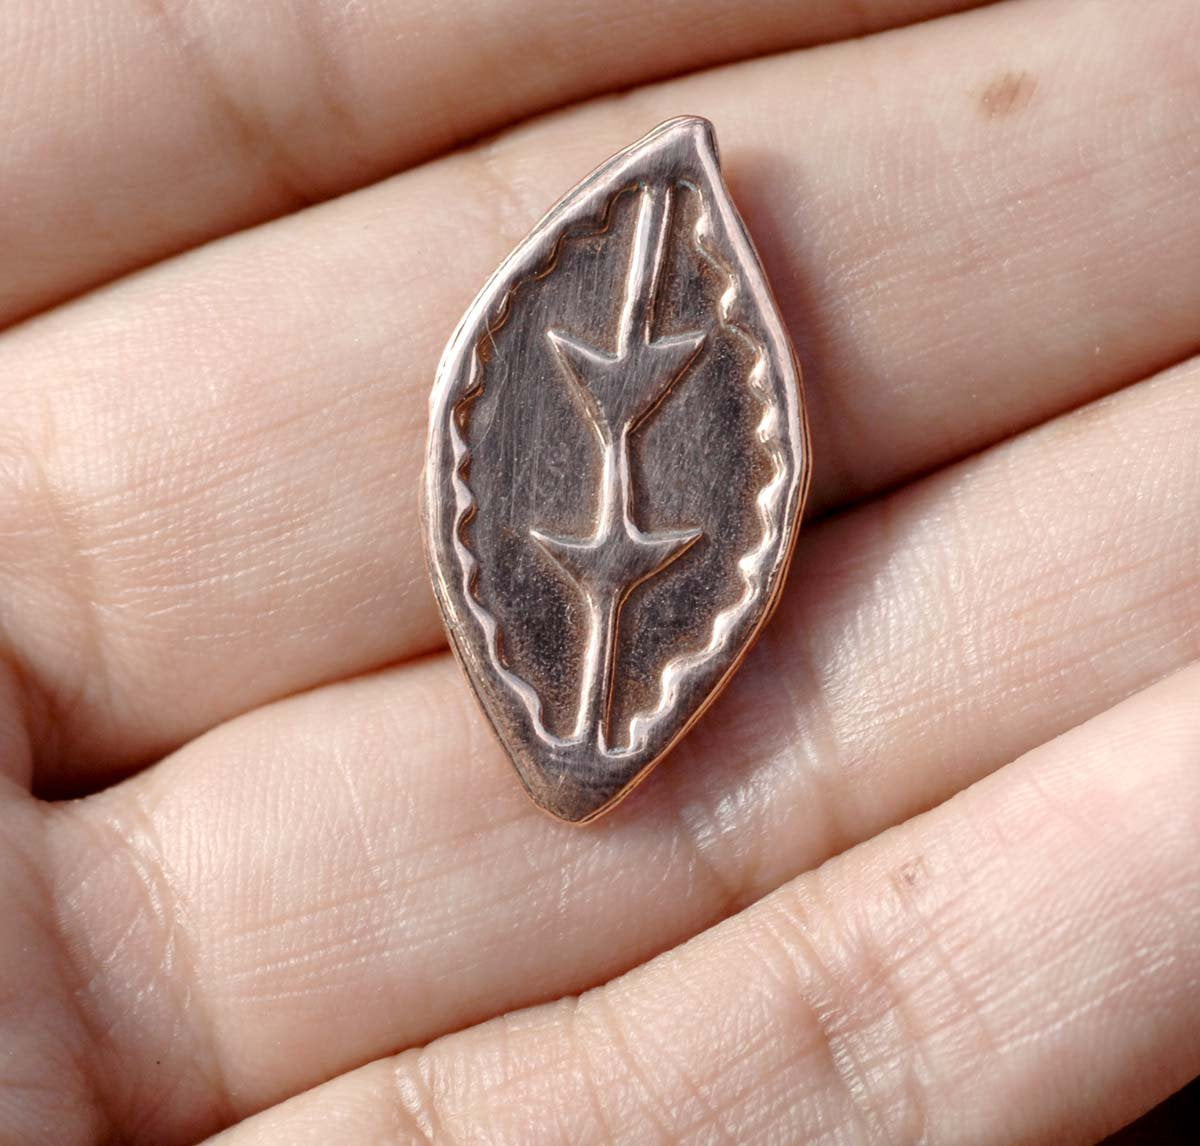 Leaf Wavy Blank With Texture, Cut Out for Enameling Stamping Texturing Jewelry Making Blanks Variety of Metals,